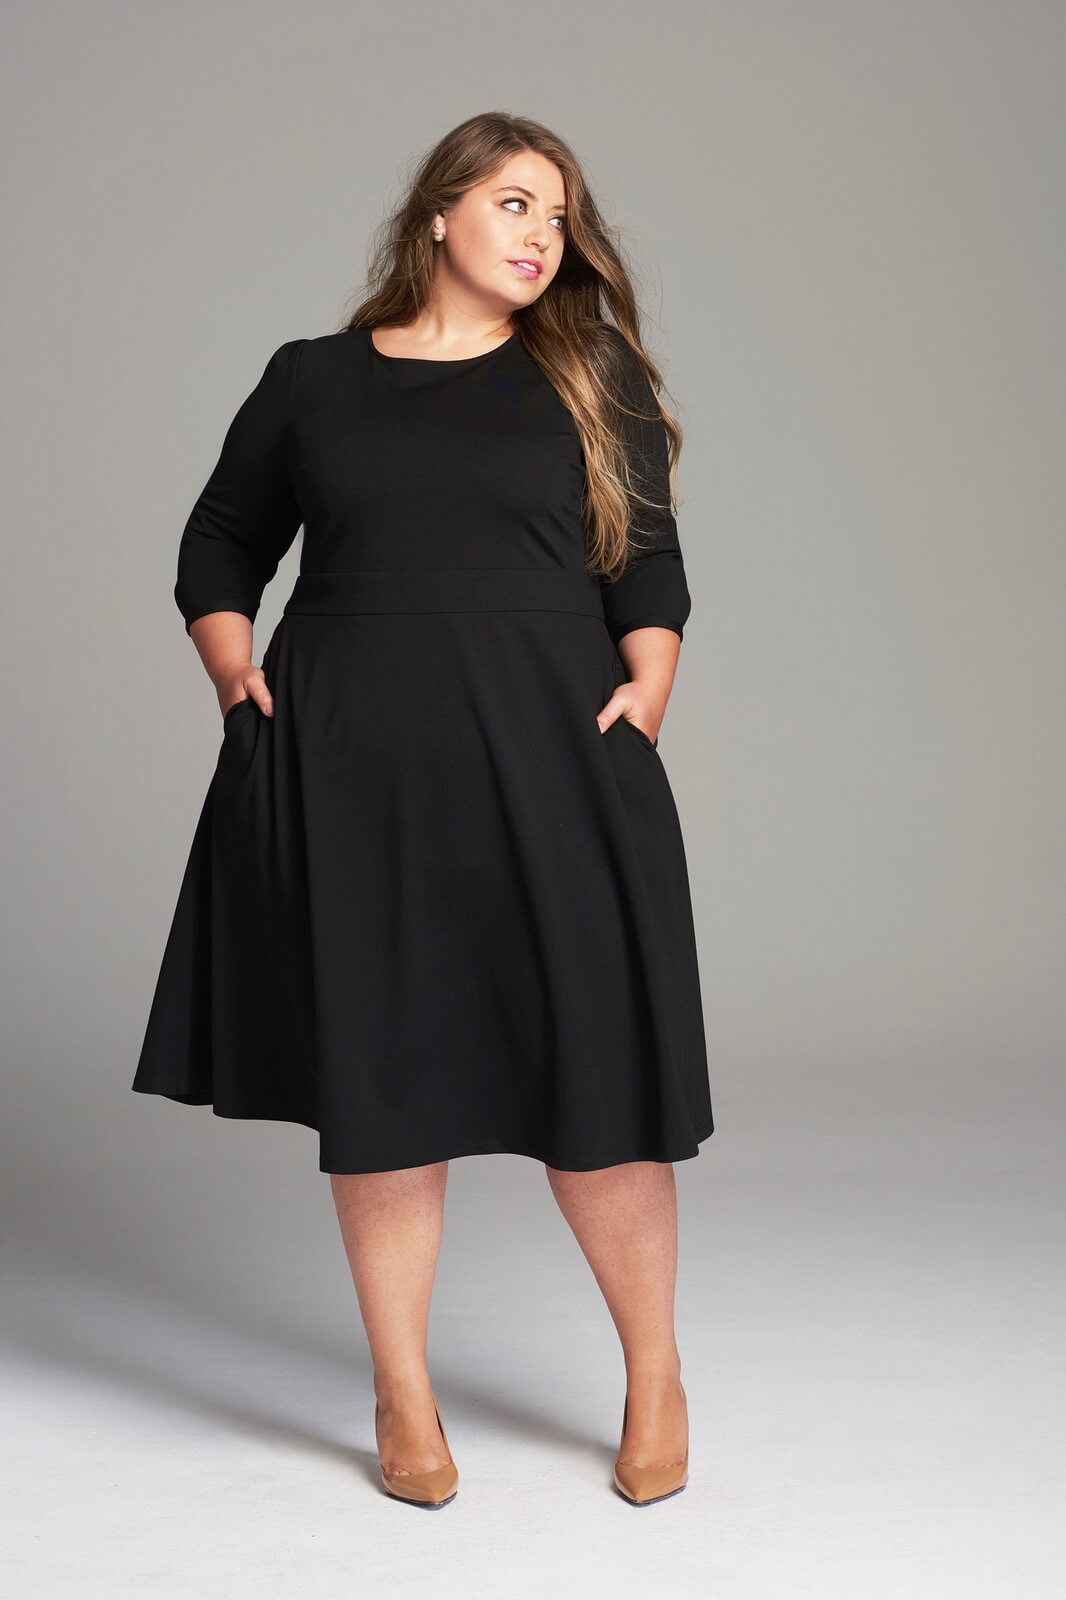 Girl With Curves Fall 2017 Little Black Dress